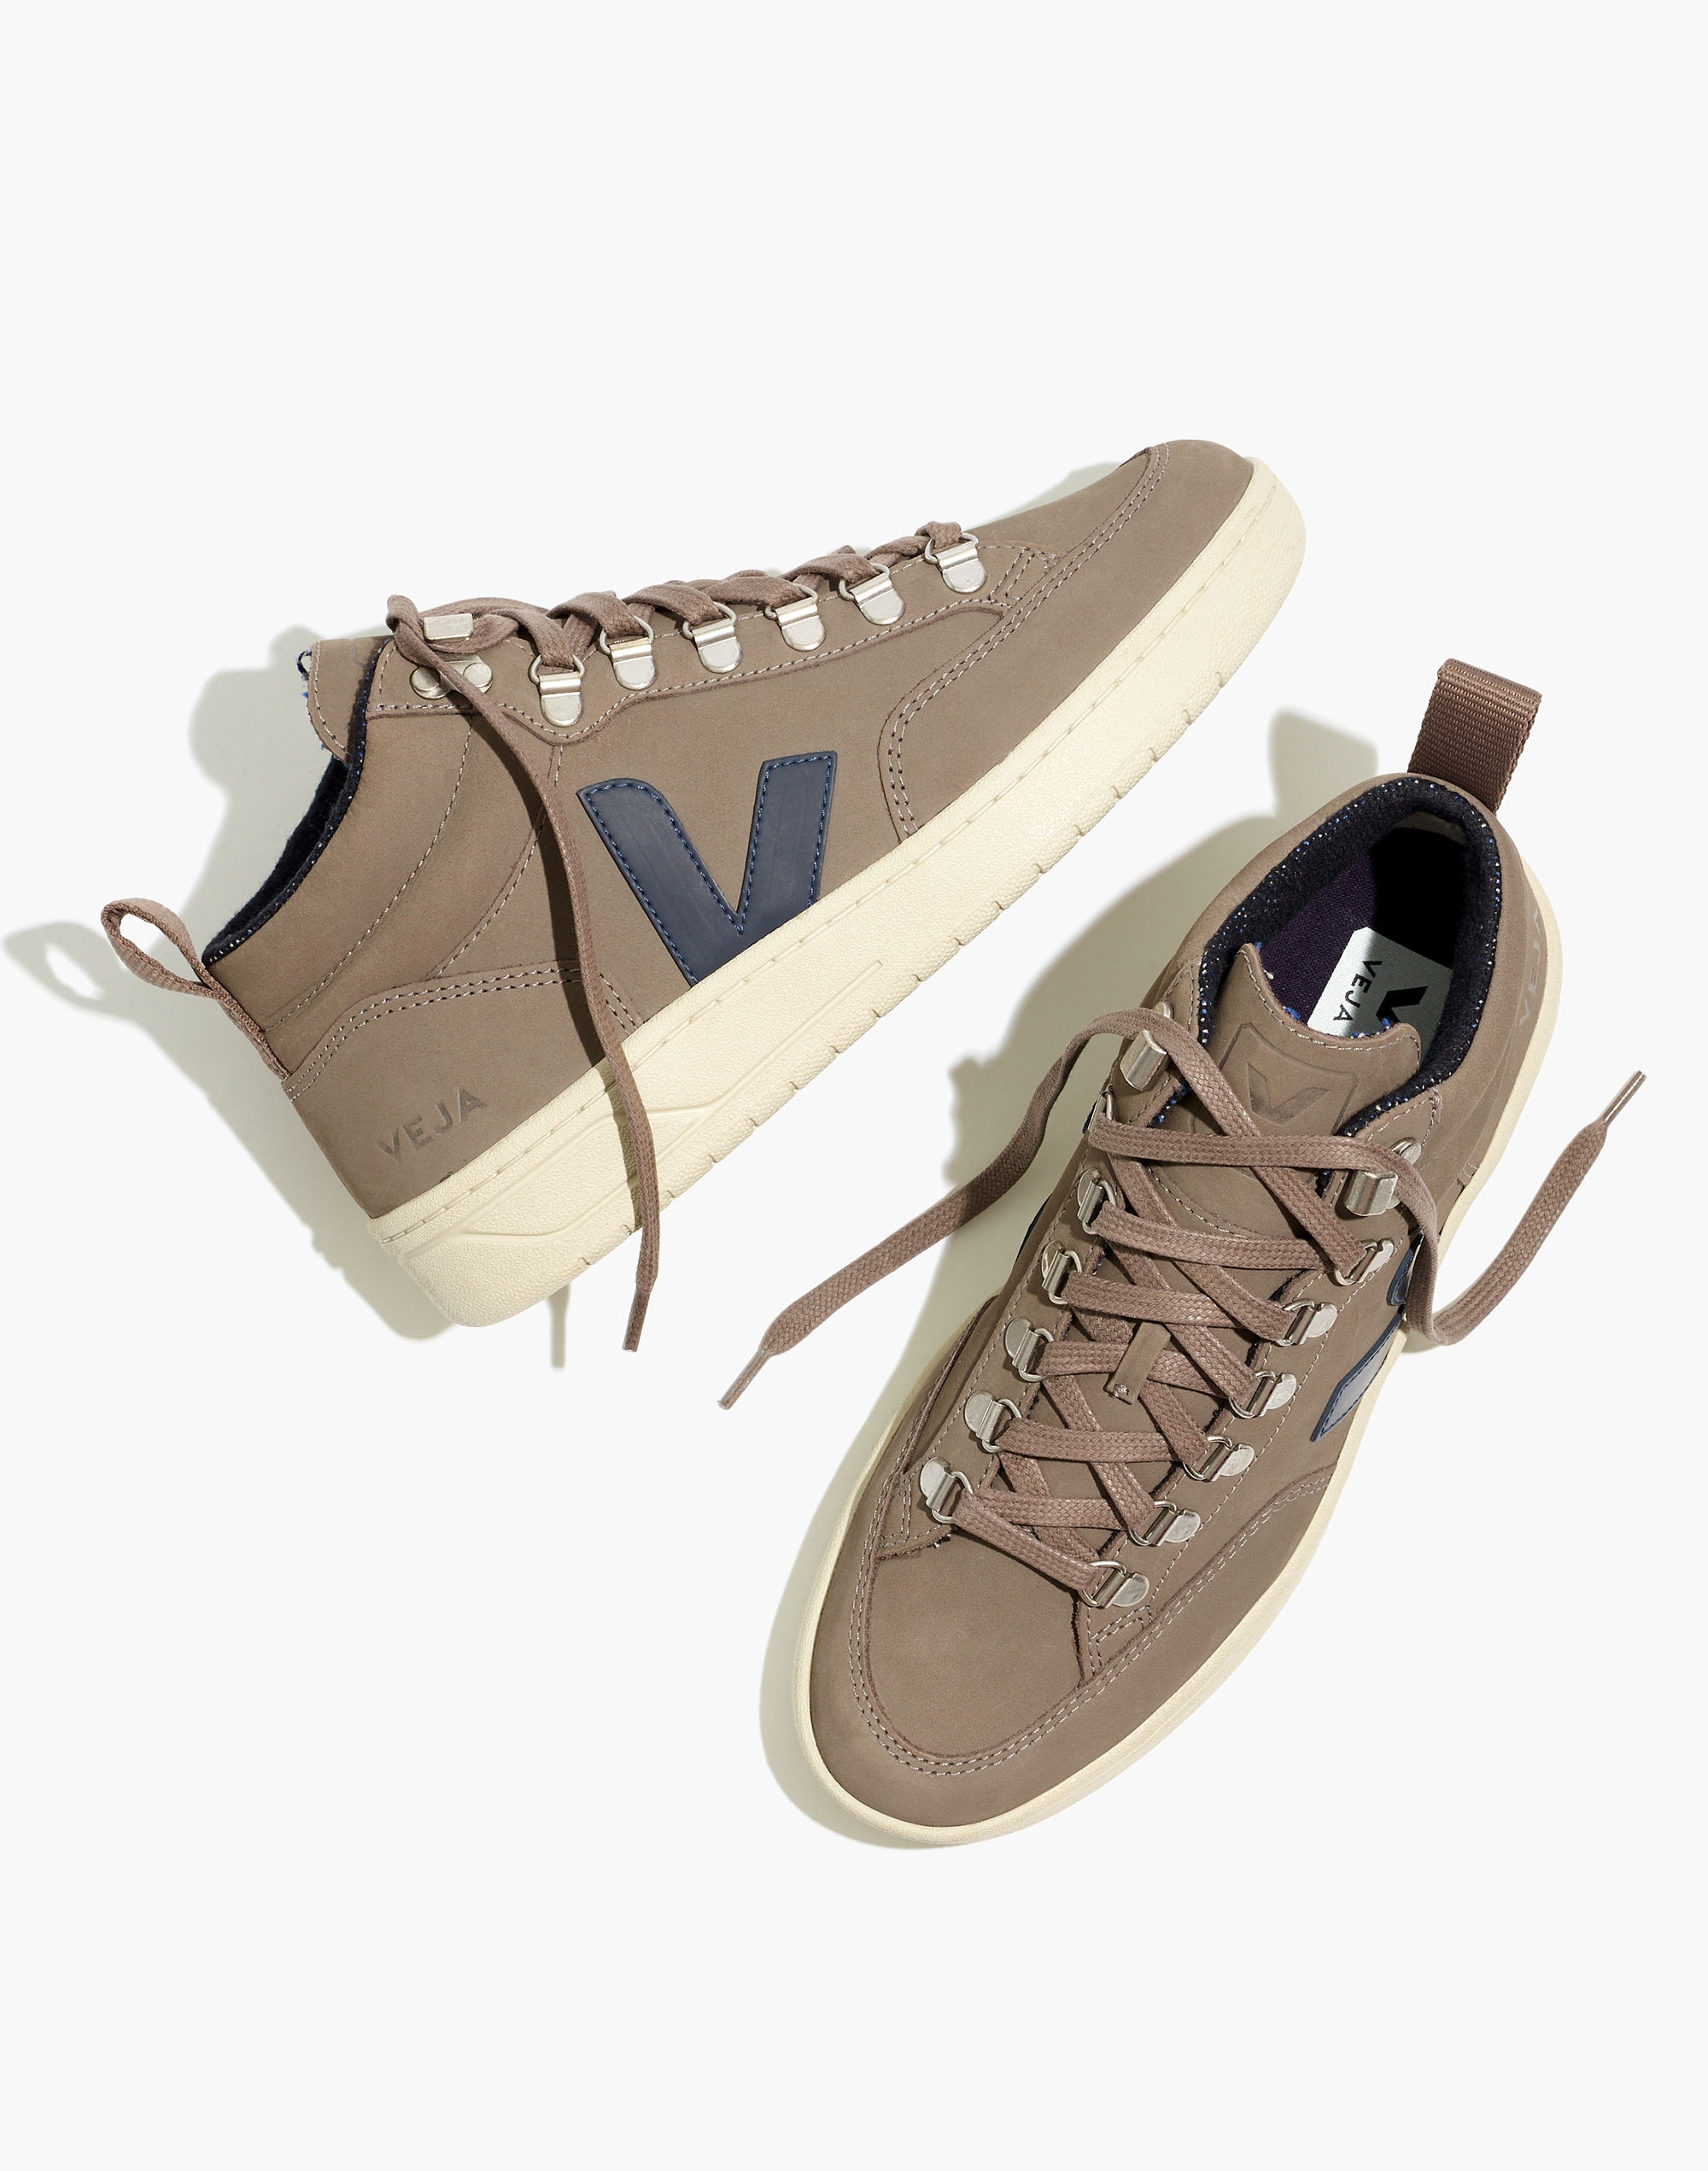 Kickoff Trainer Sneakers in Leather and Spot Mix Calf Hair